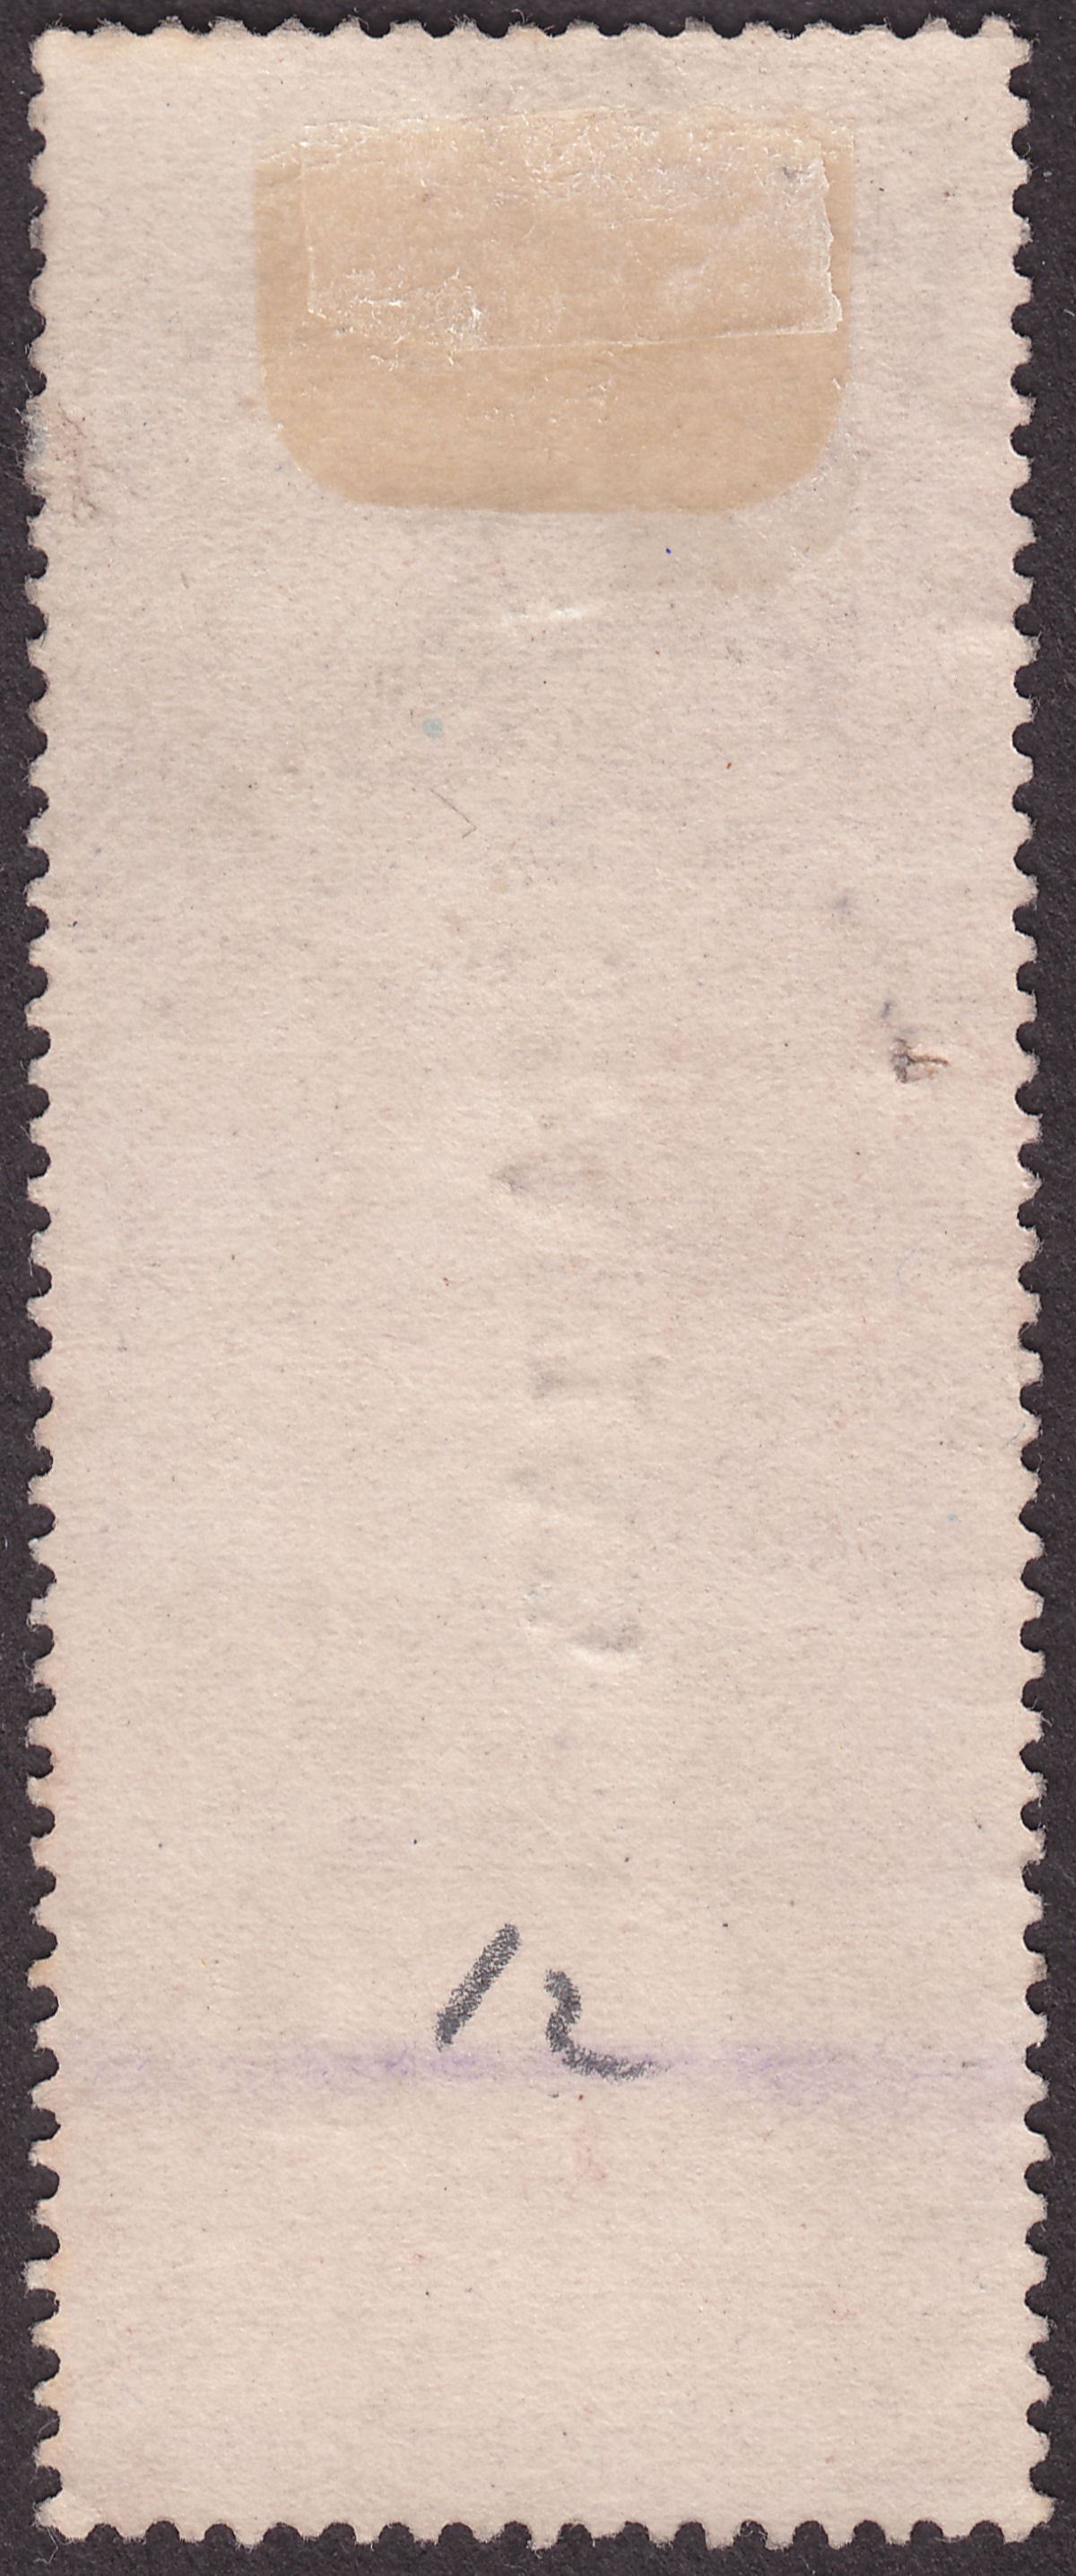 India 1879 QV Revenue Notarial Overprint 21mm Down Foreign Bill 1r Used BF10aB